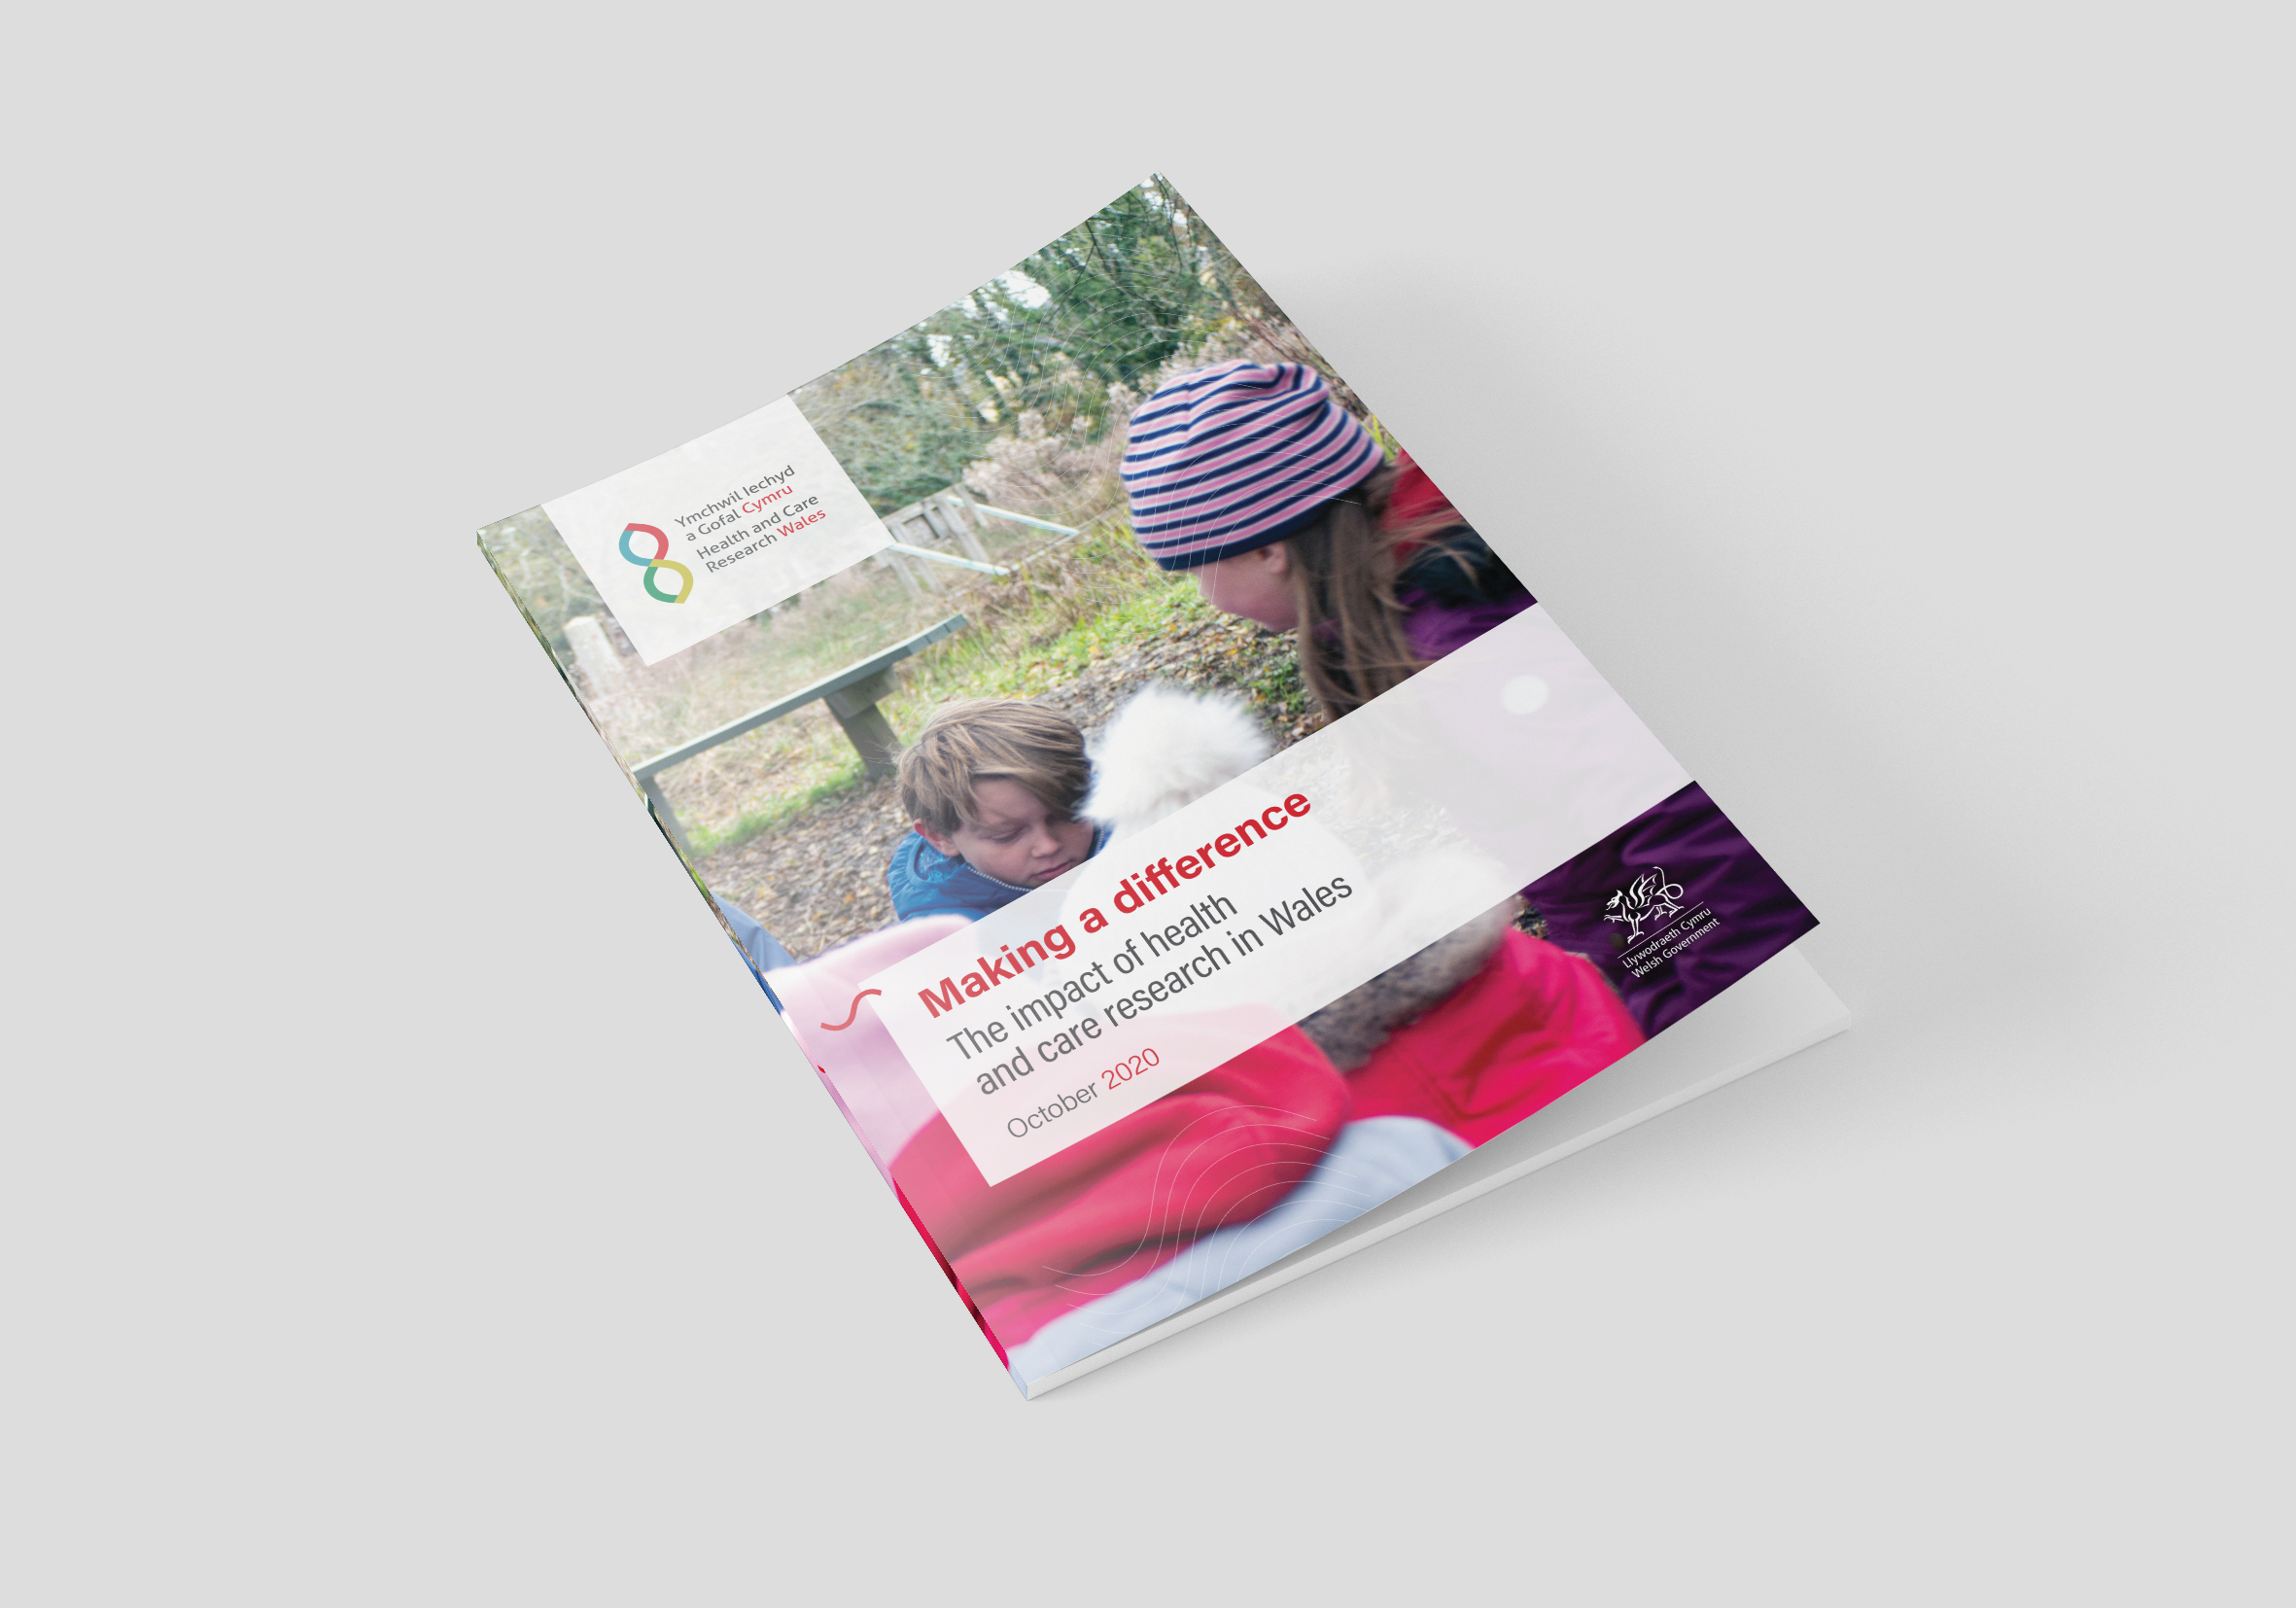 Cover of a report titled 'Making a difference: The impact of health and care research in Wales, October 2020' featuring a photo of a child and adult examining nature, with the Health and Care Research Wales logo in the corner.